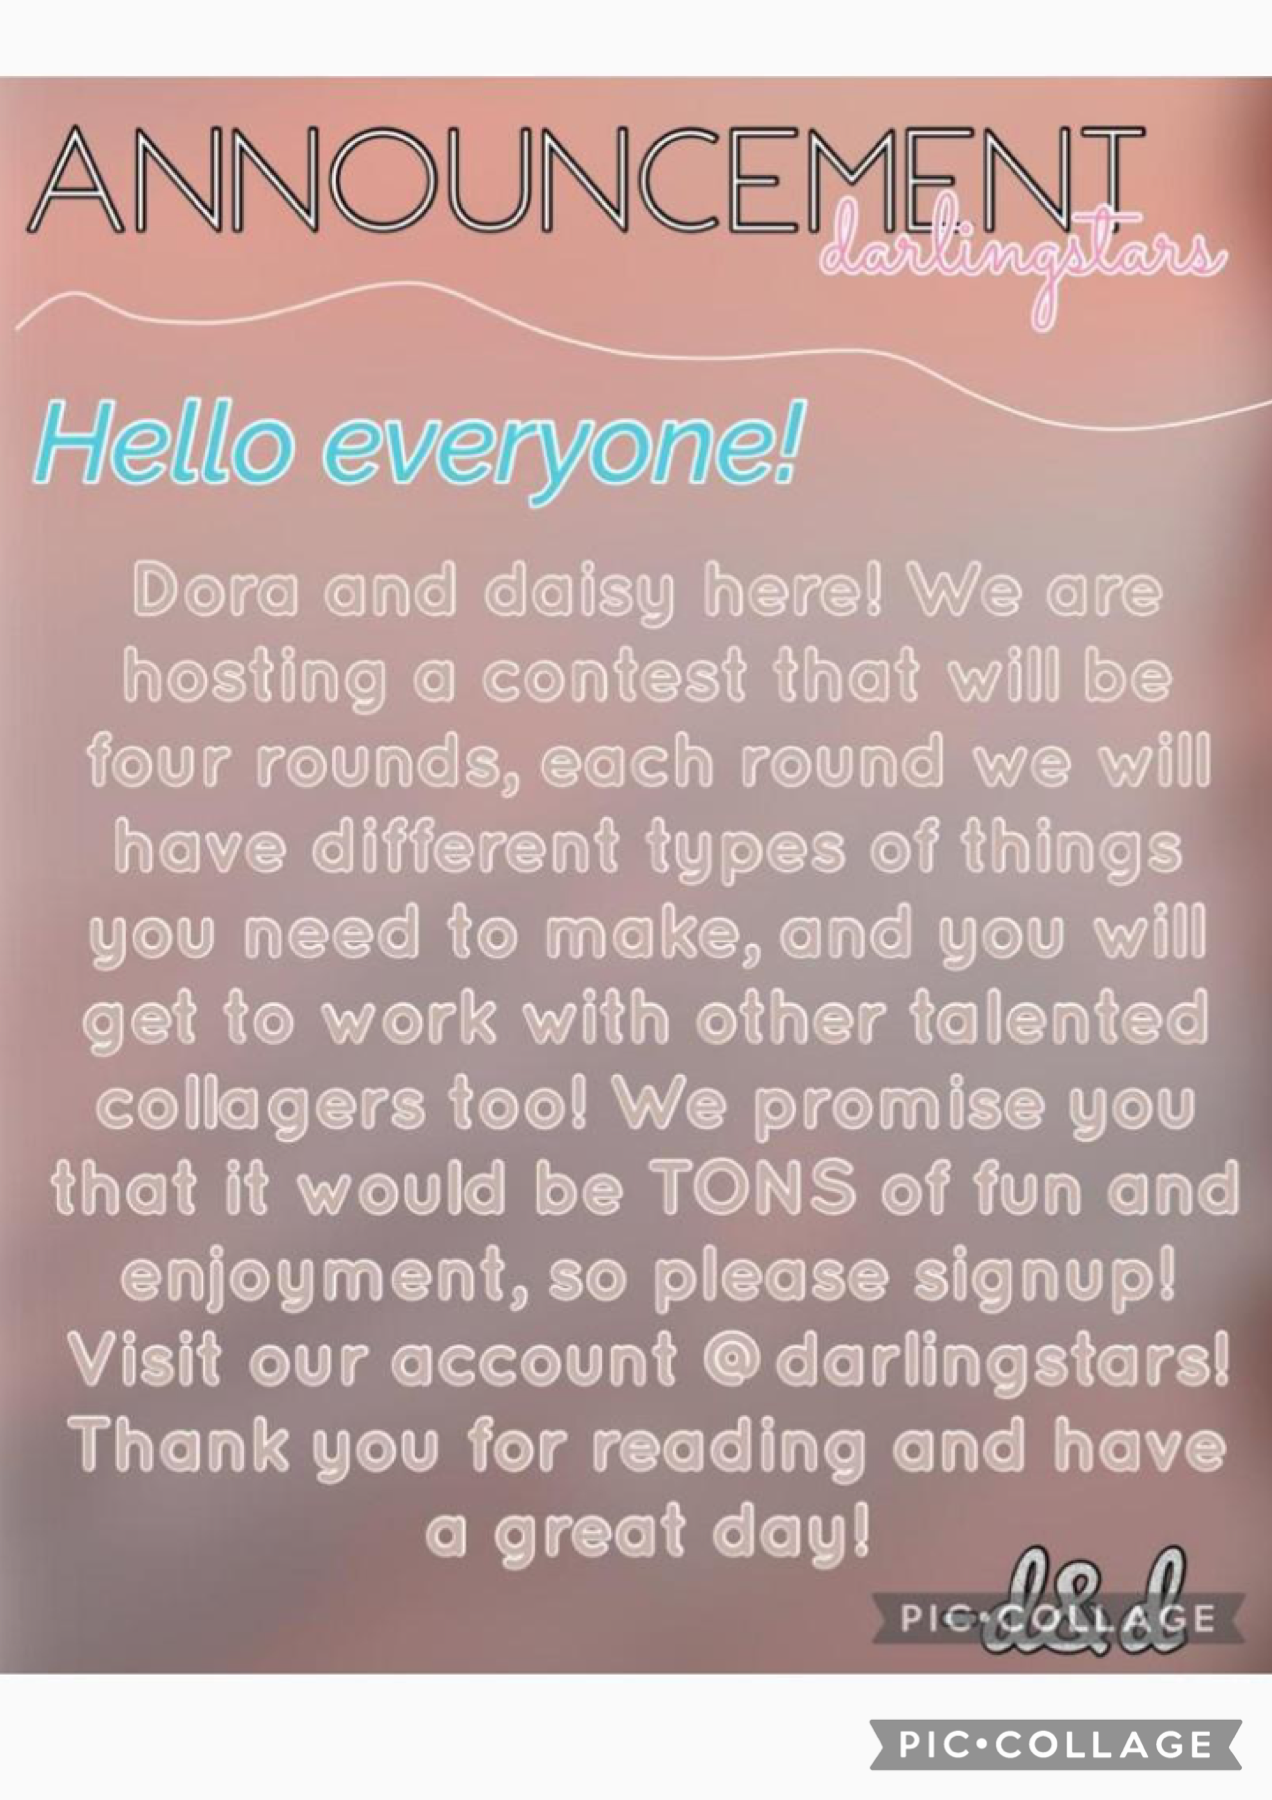 Please go to our account! The contest will come soon!